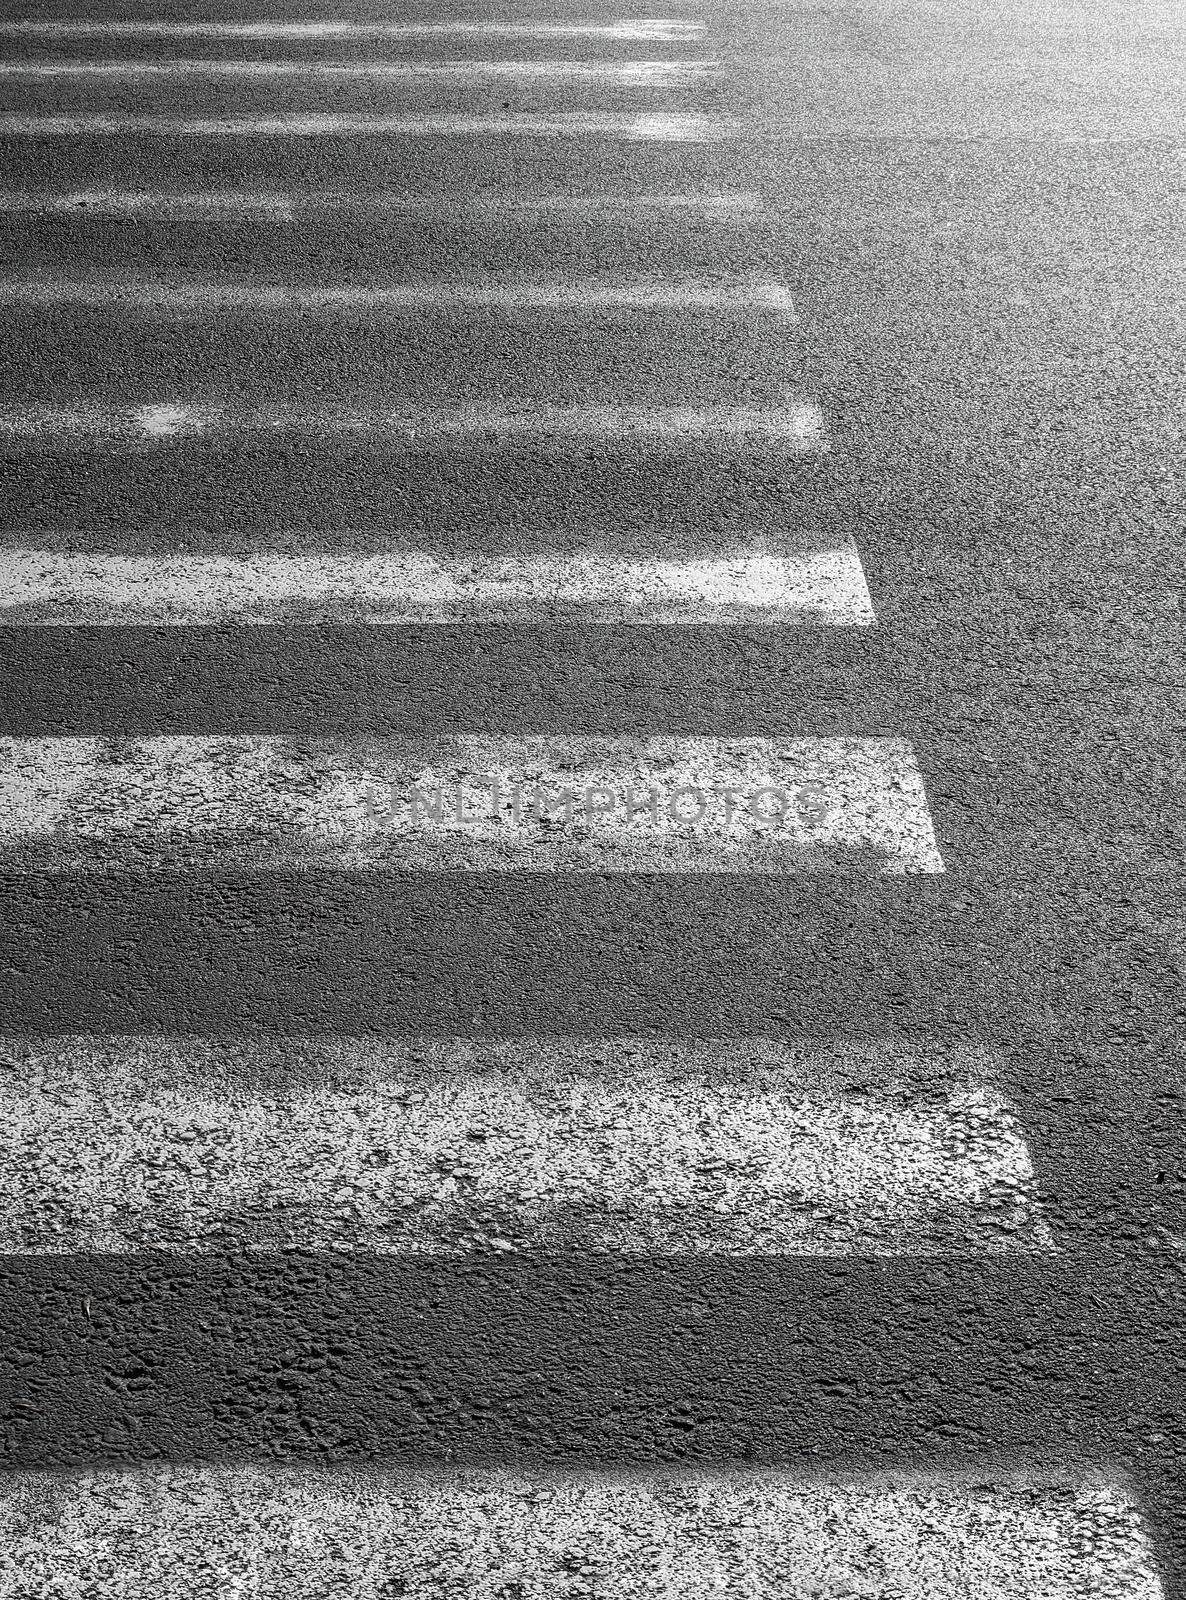 worn crosswalk on the road for safety when people walking cross the street. by Nickstock